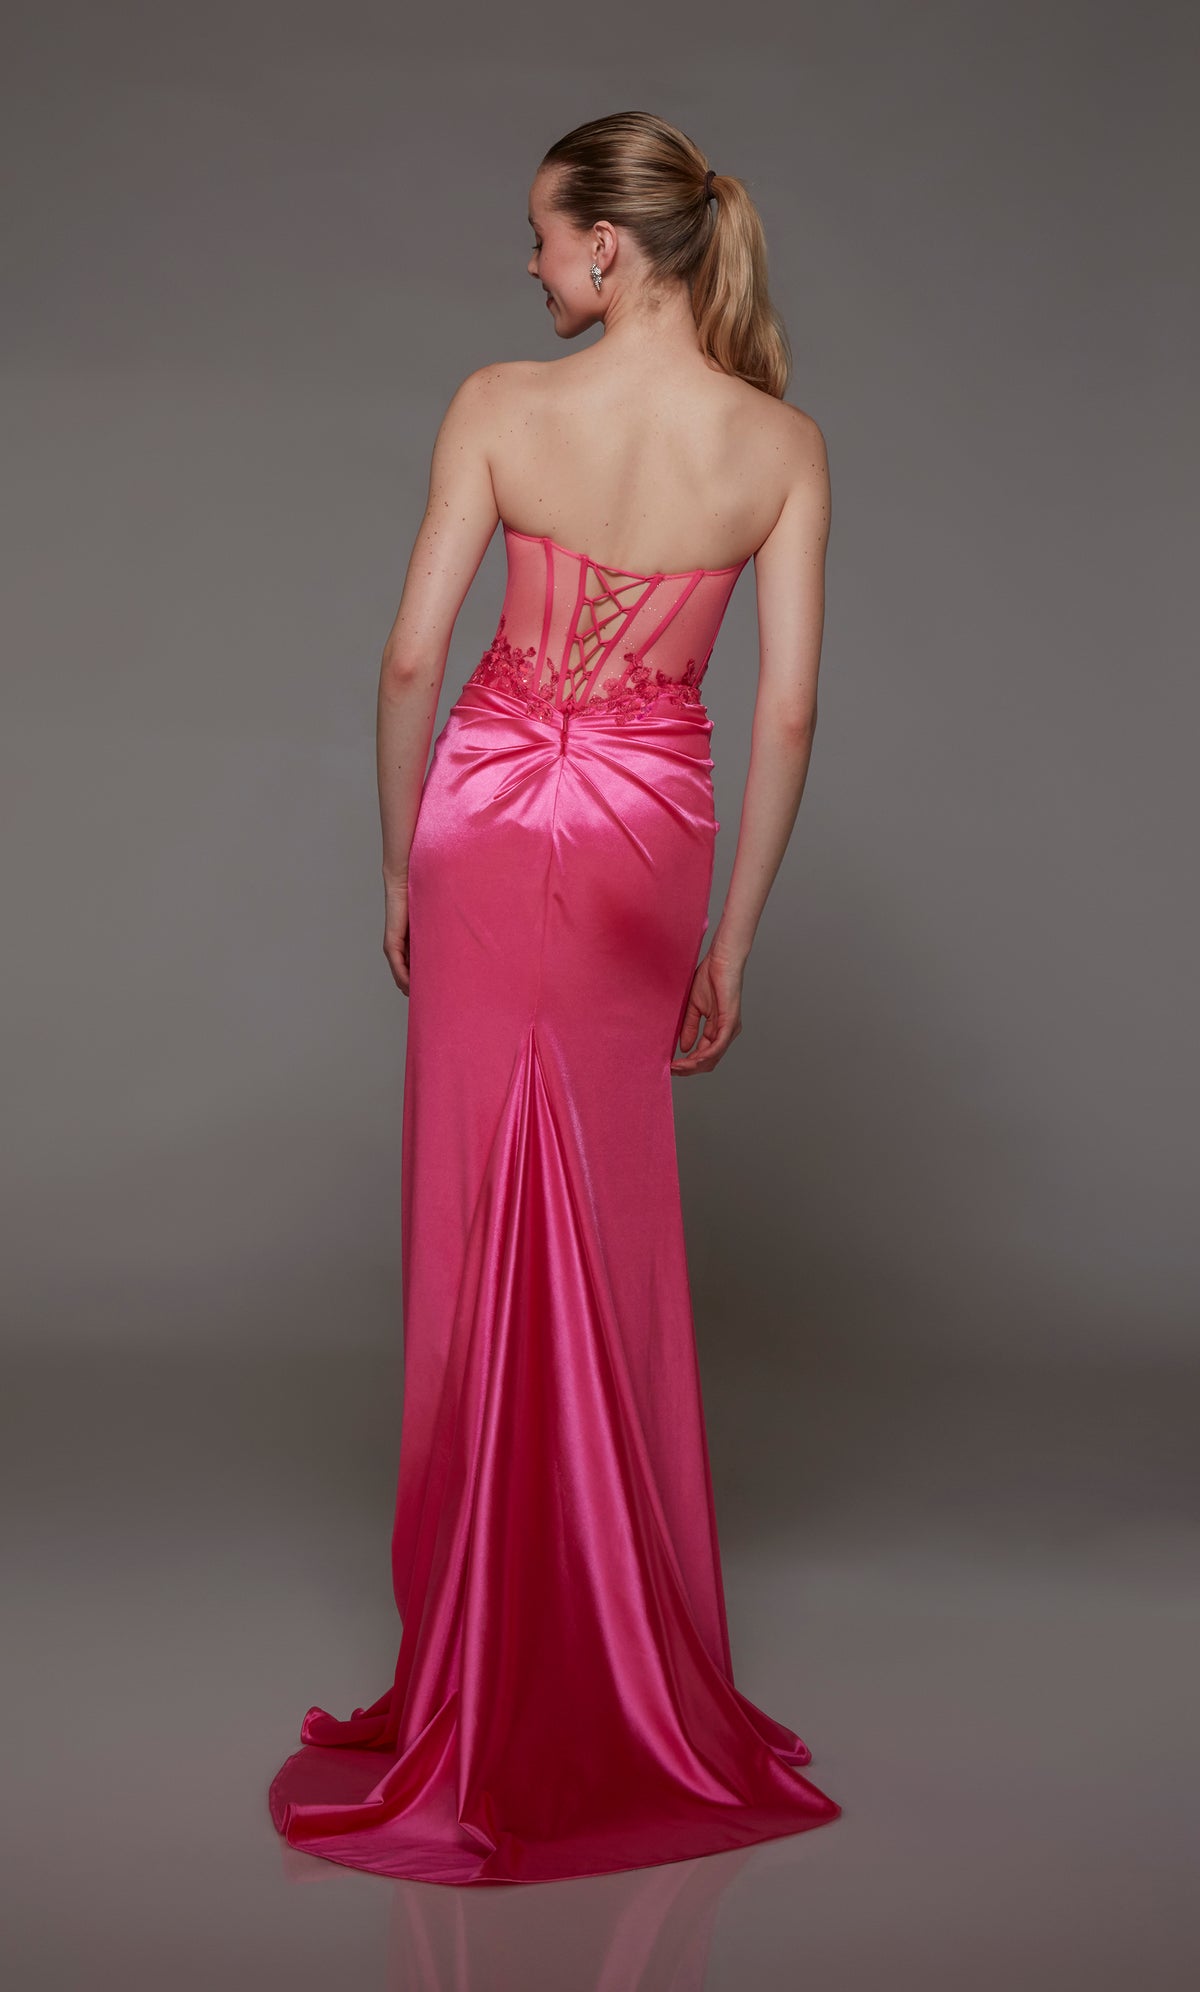 Neon pink corset prom dress: sheer bodice, ruching, high slit, lace-up back, train. Stretch satin with beaded lace accents for an dazzling look.